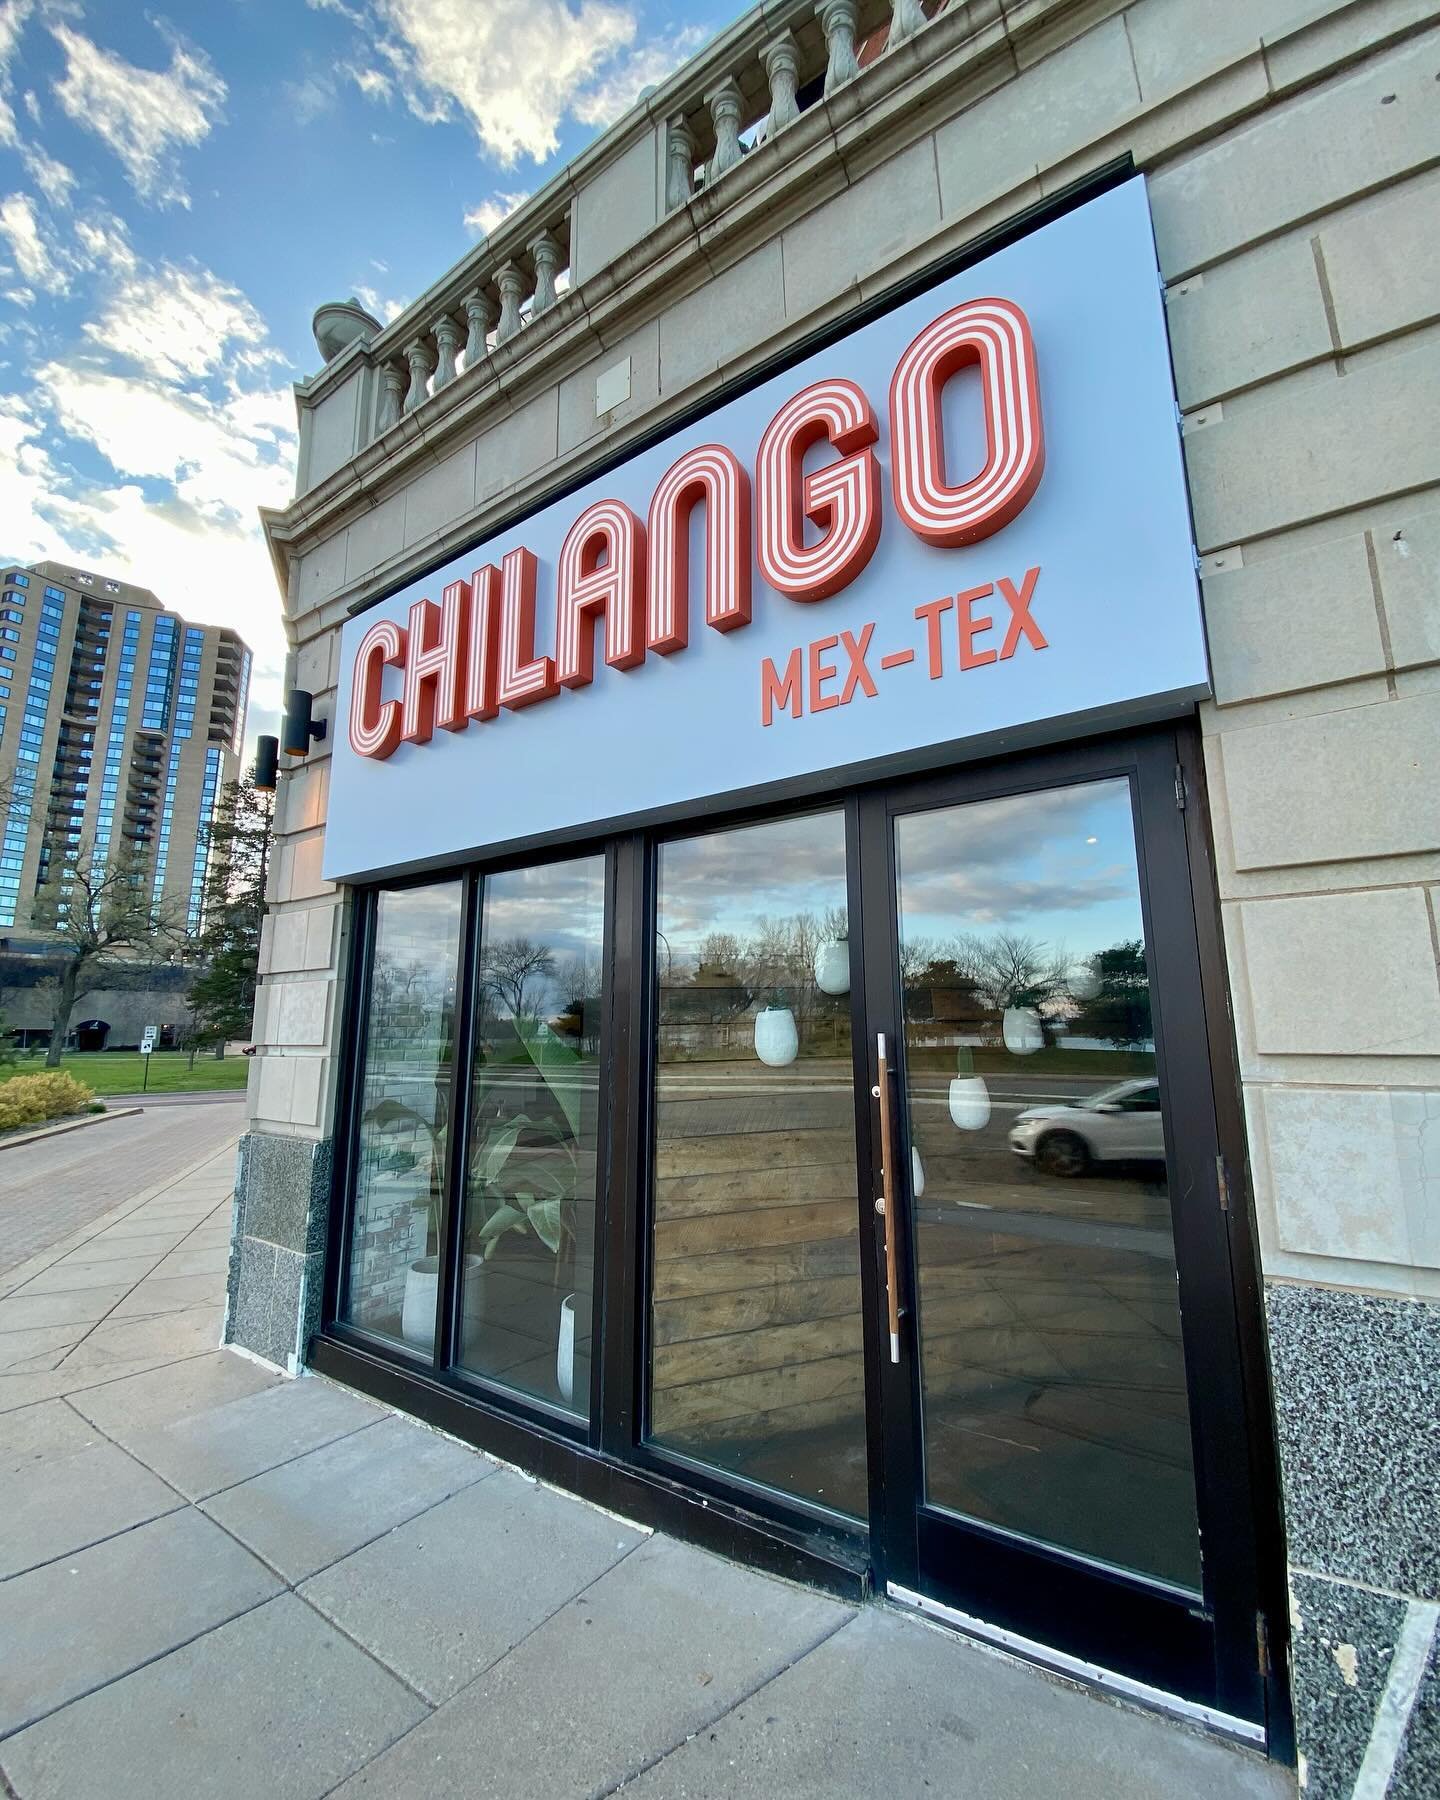 Chilango 🤝 Misfit
Partners in Crime

Could not be more excited to partner with chef @jorgeguzman1 and @chilango_mextex in Minneapolis. Chilango serves authentic Mex-Tex in a historic setting overlooking Lake Bde Maka Ska. Incredible art from @roco_d